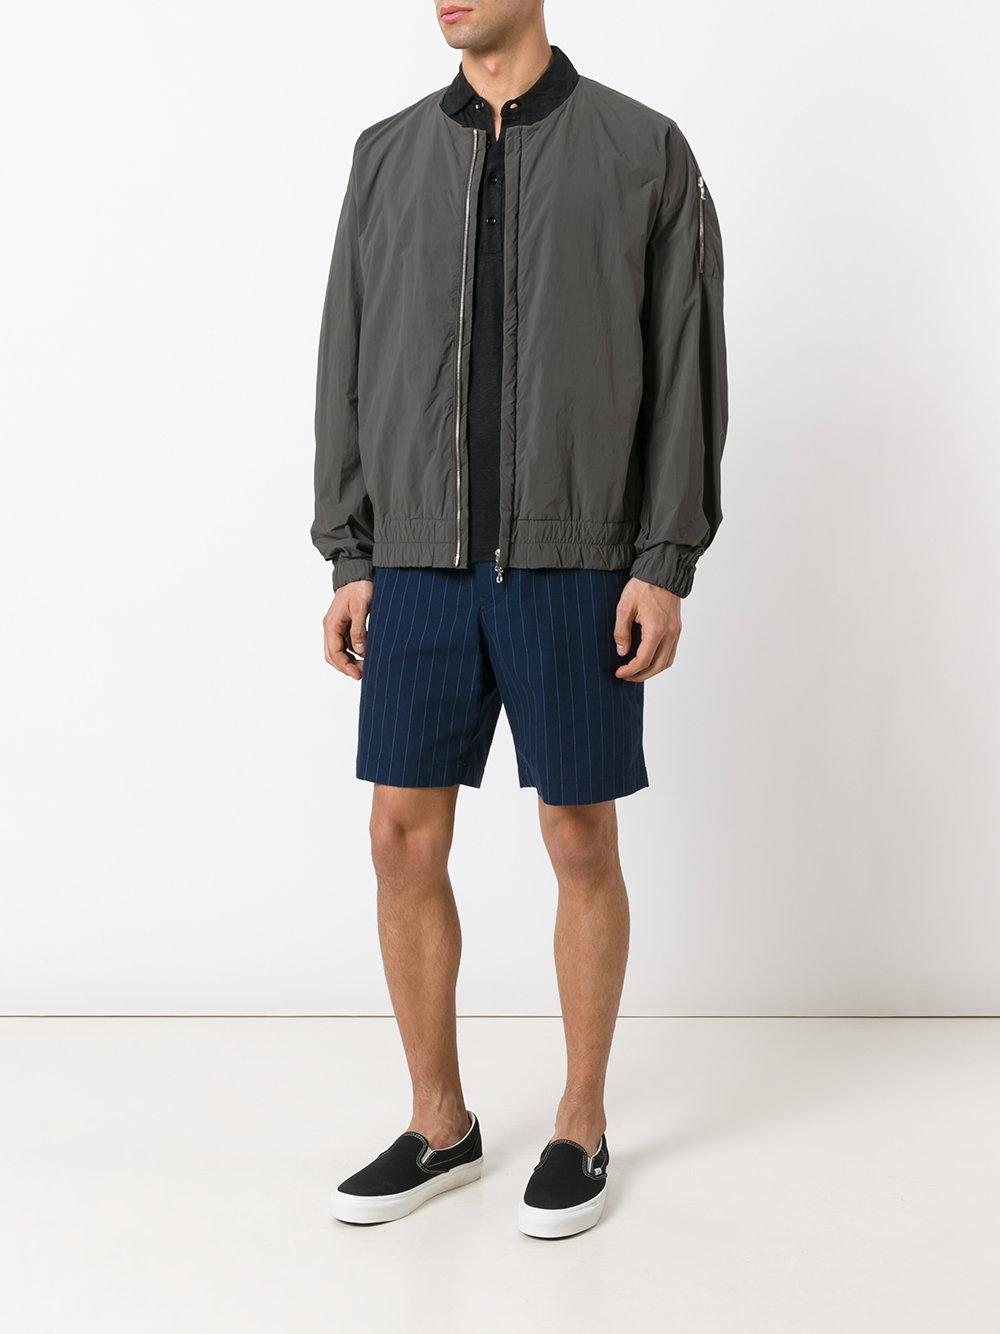 Lyst - Attachment Collarless Zip Jacket in Gray for Men